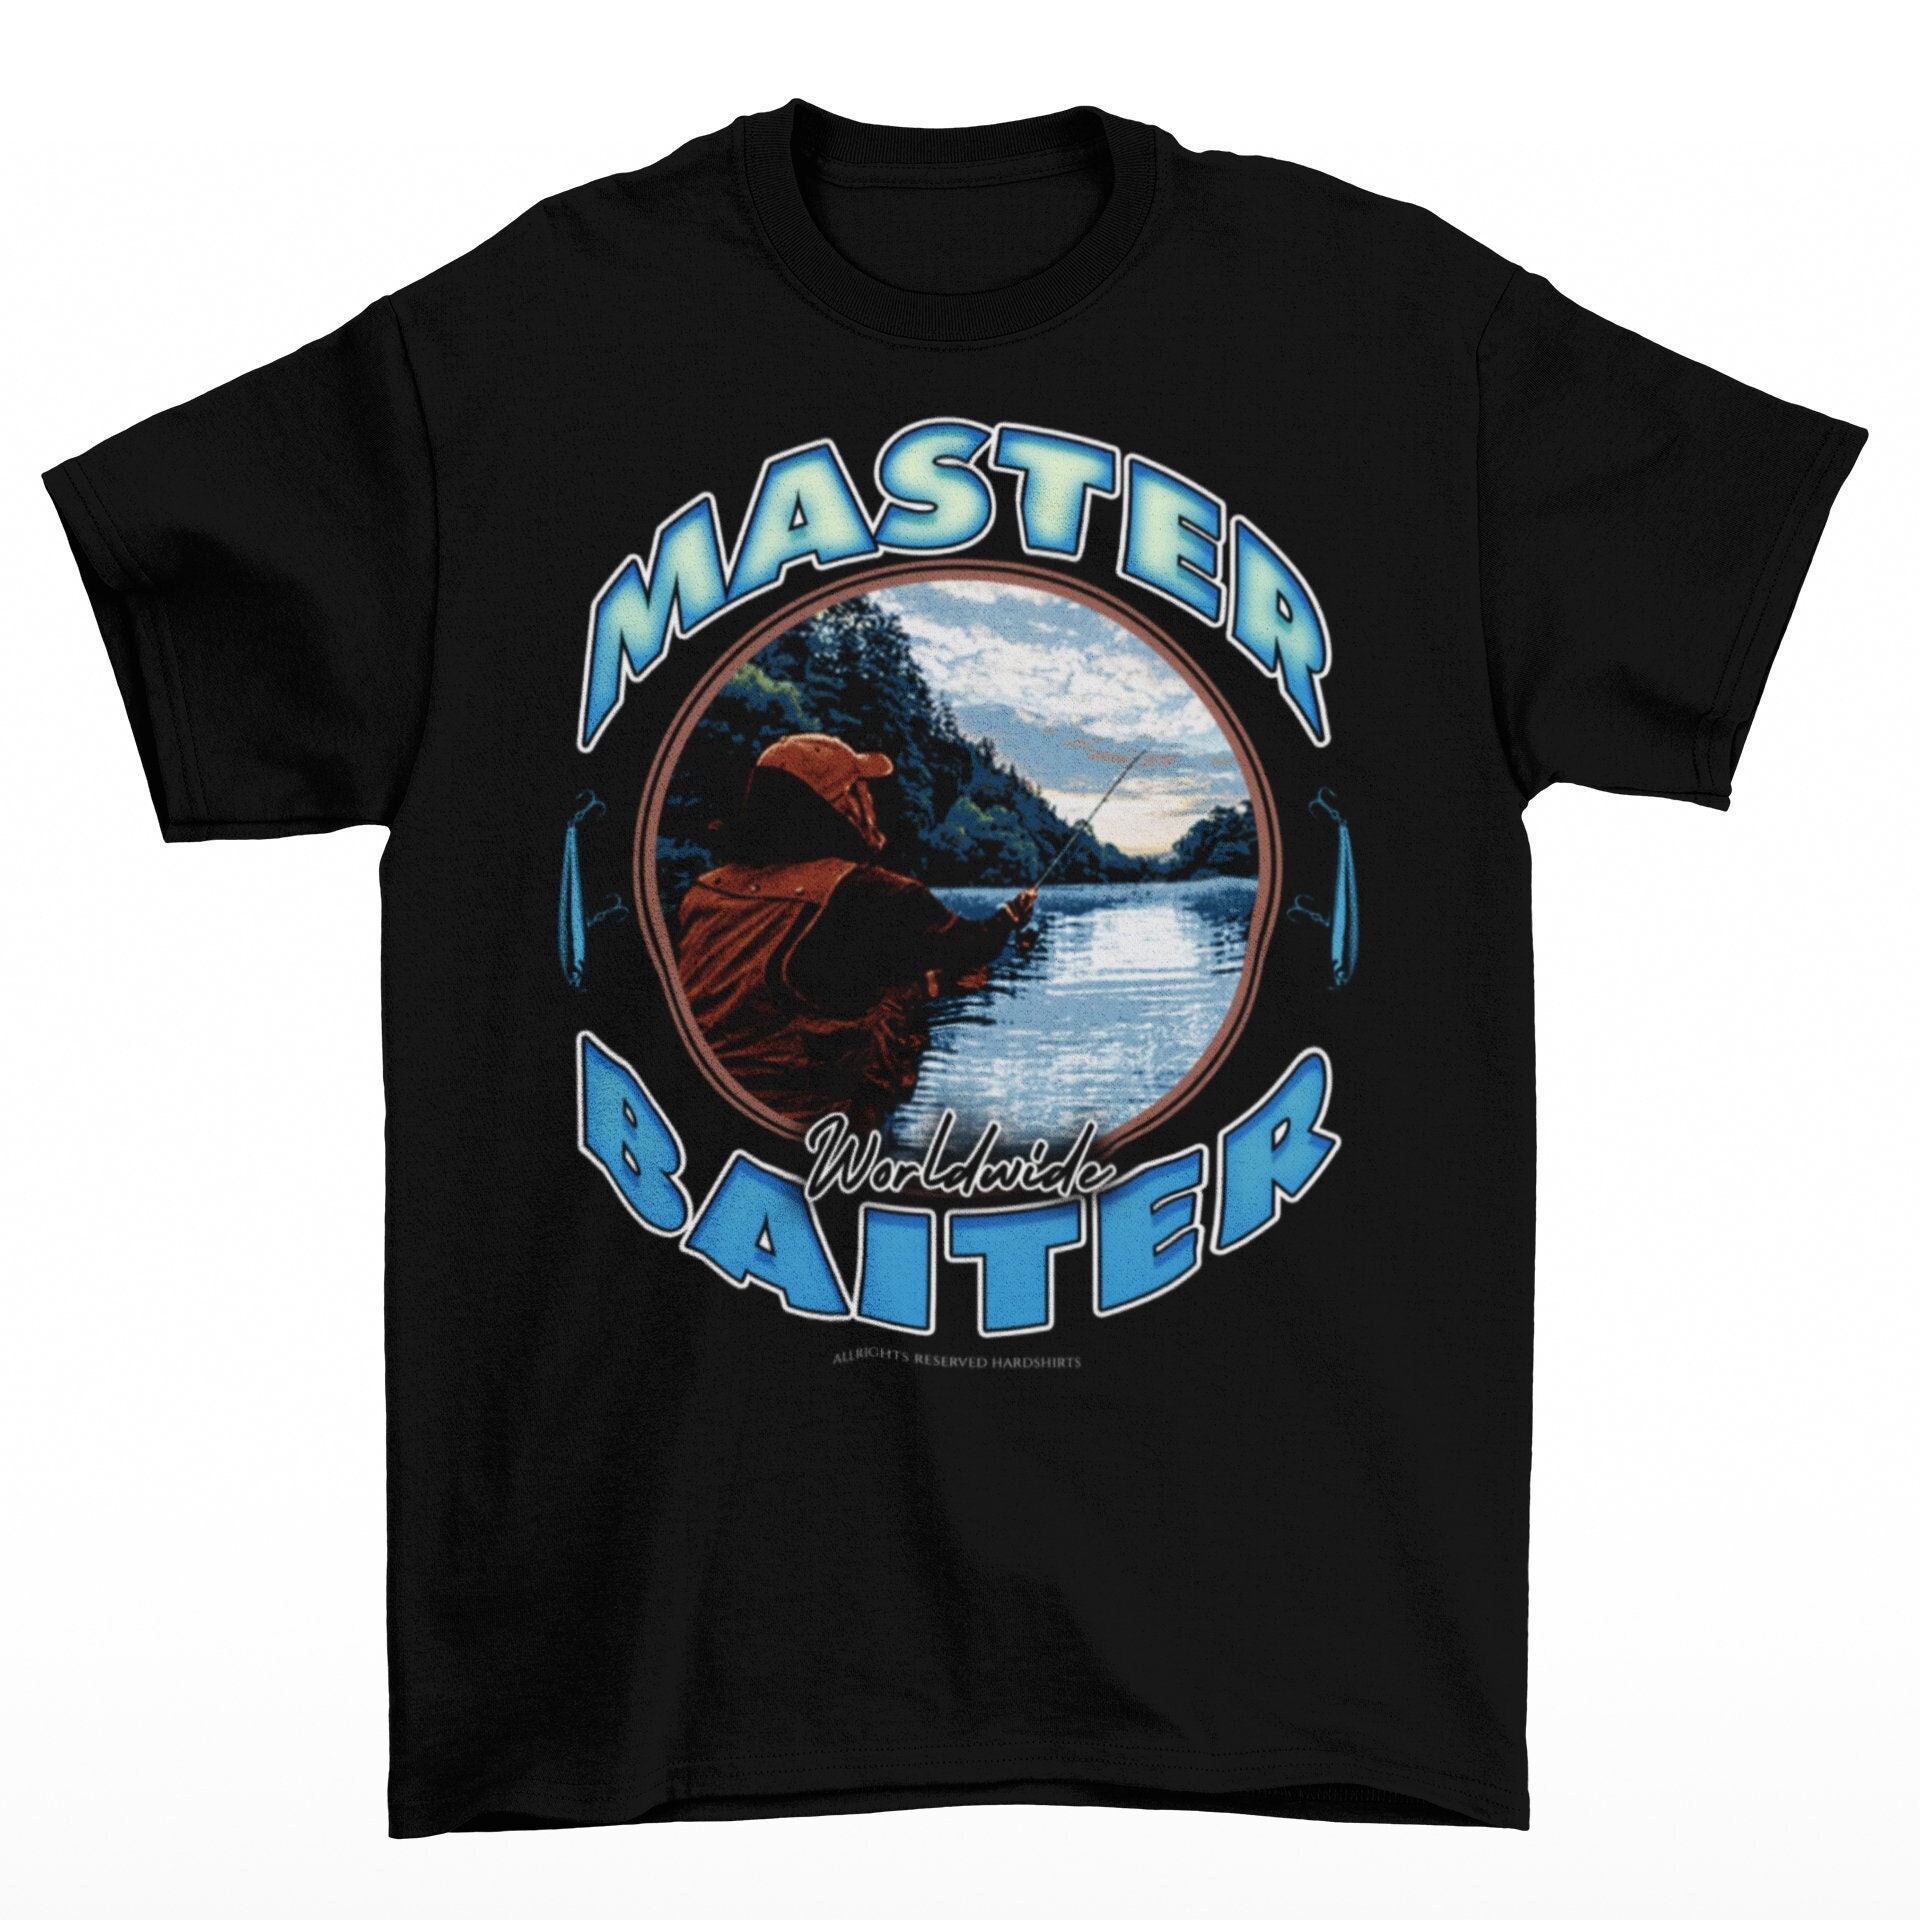 Fishing T-shirt, Maister Baiter, Funny Mens Top, Gift for Fisherman, Dad  Boyfriend Present for Fish Fan Fishers Tshirt up to Large Size -  Canada